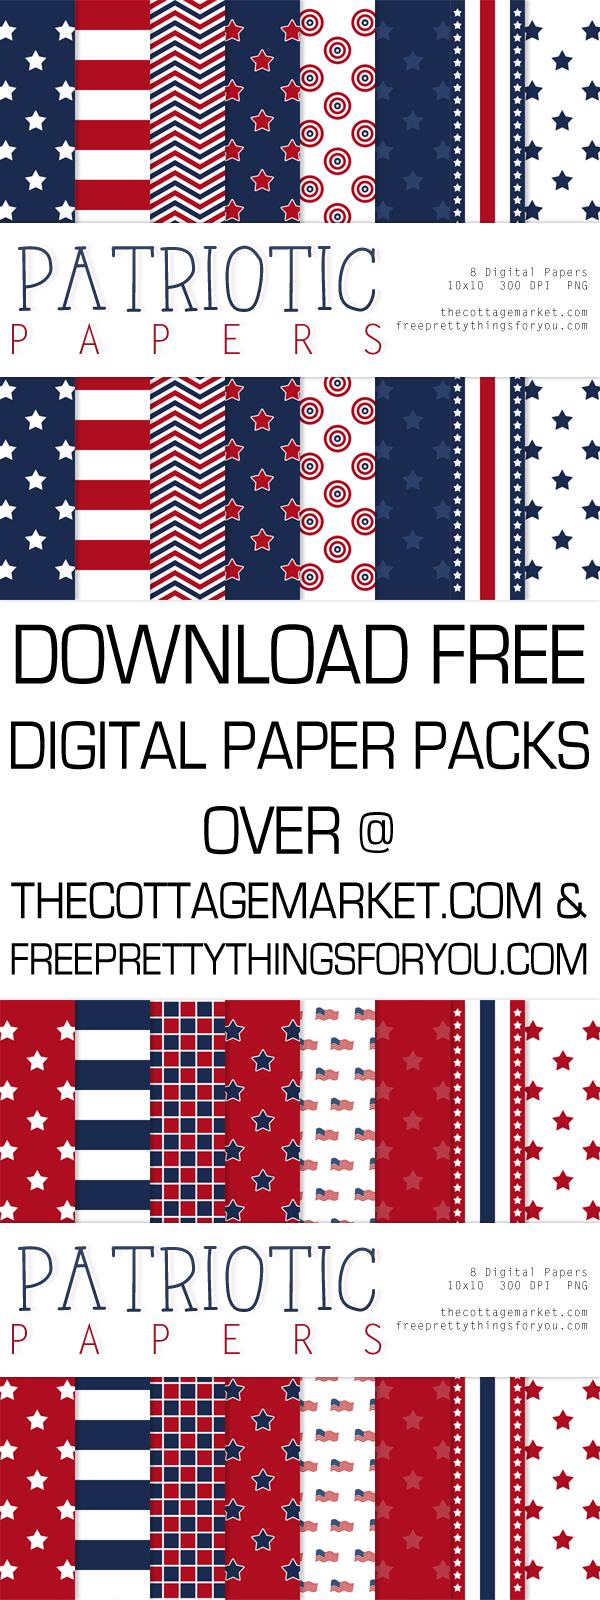 http://www.thecottagemarket.com/wp-content/uploads/2014/06/TCMFPTFY-PatrioticPapers-Tower1.png